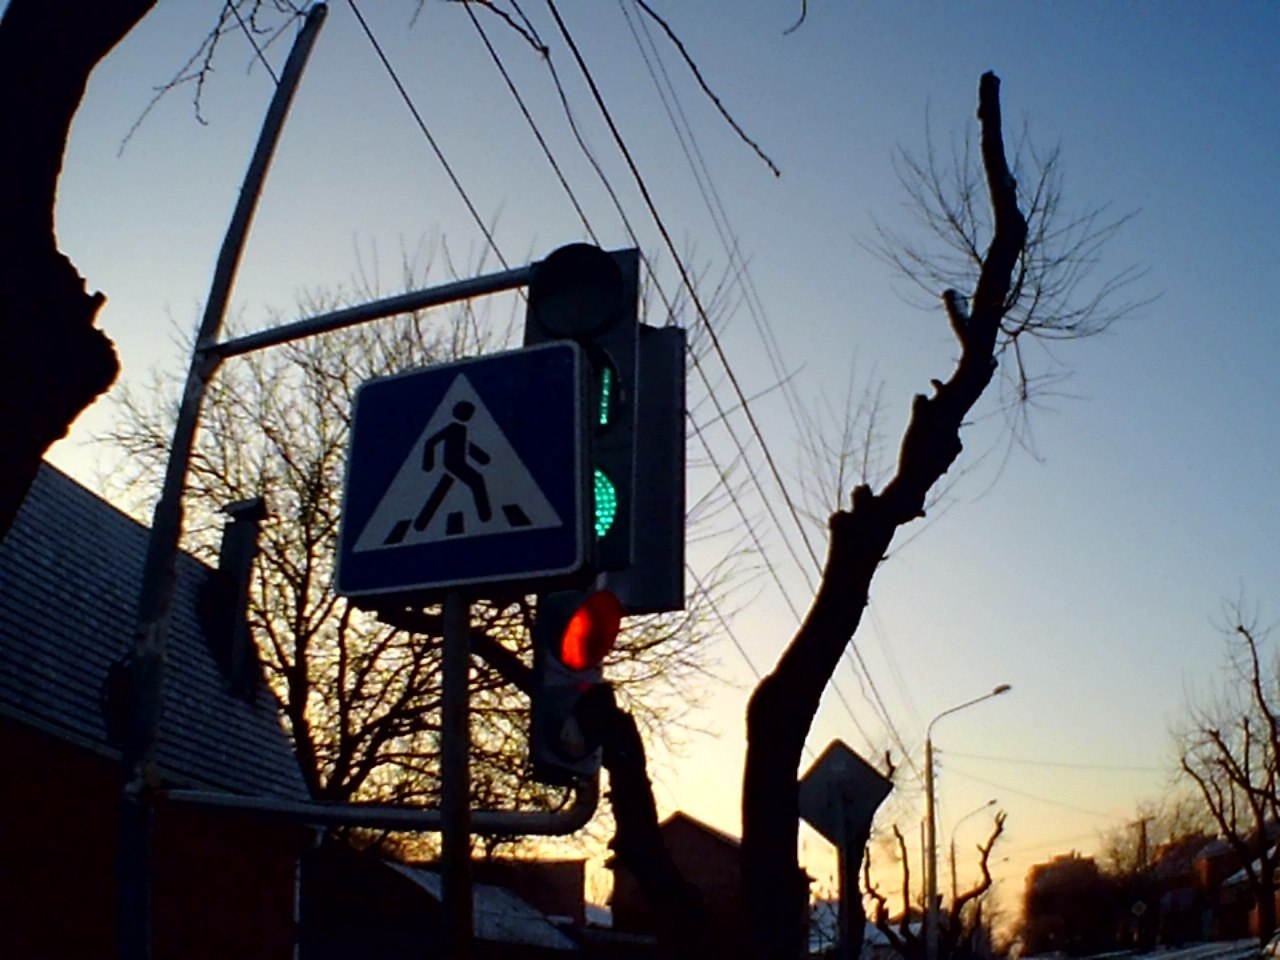 The traffic signal can be seen from afar..) - , These, Road sign, Not properly, Tag